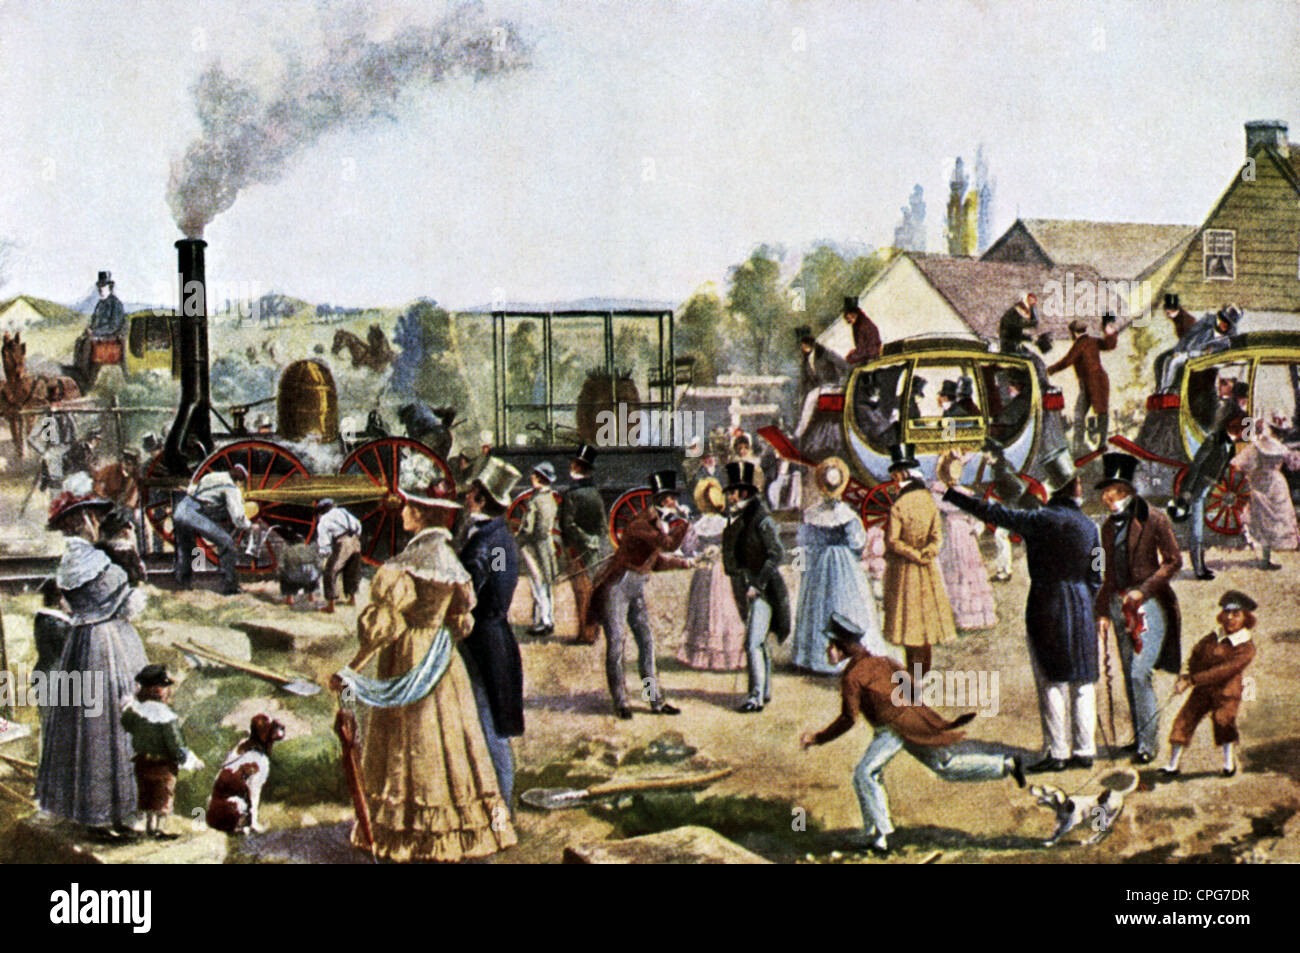 transport / transportation, railway, the first railway, passenger train on railroad line Stockton - Darlington, England, 27.9.1825, Additional-Rights-Clearences-Not Available Stock Photo